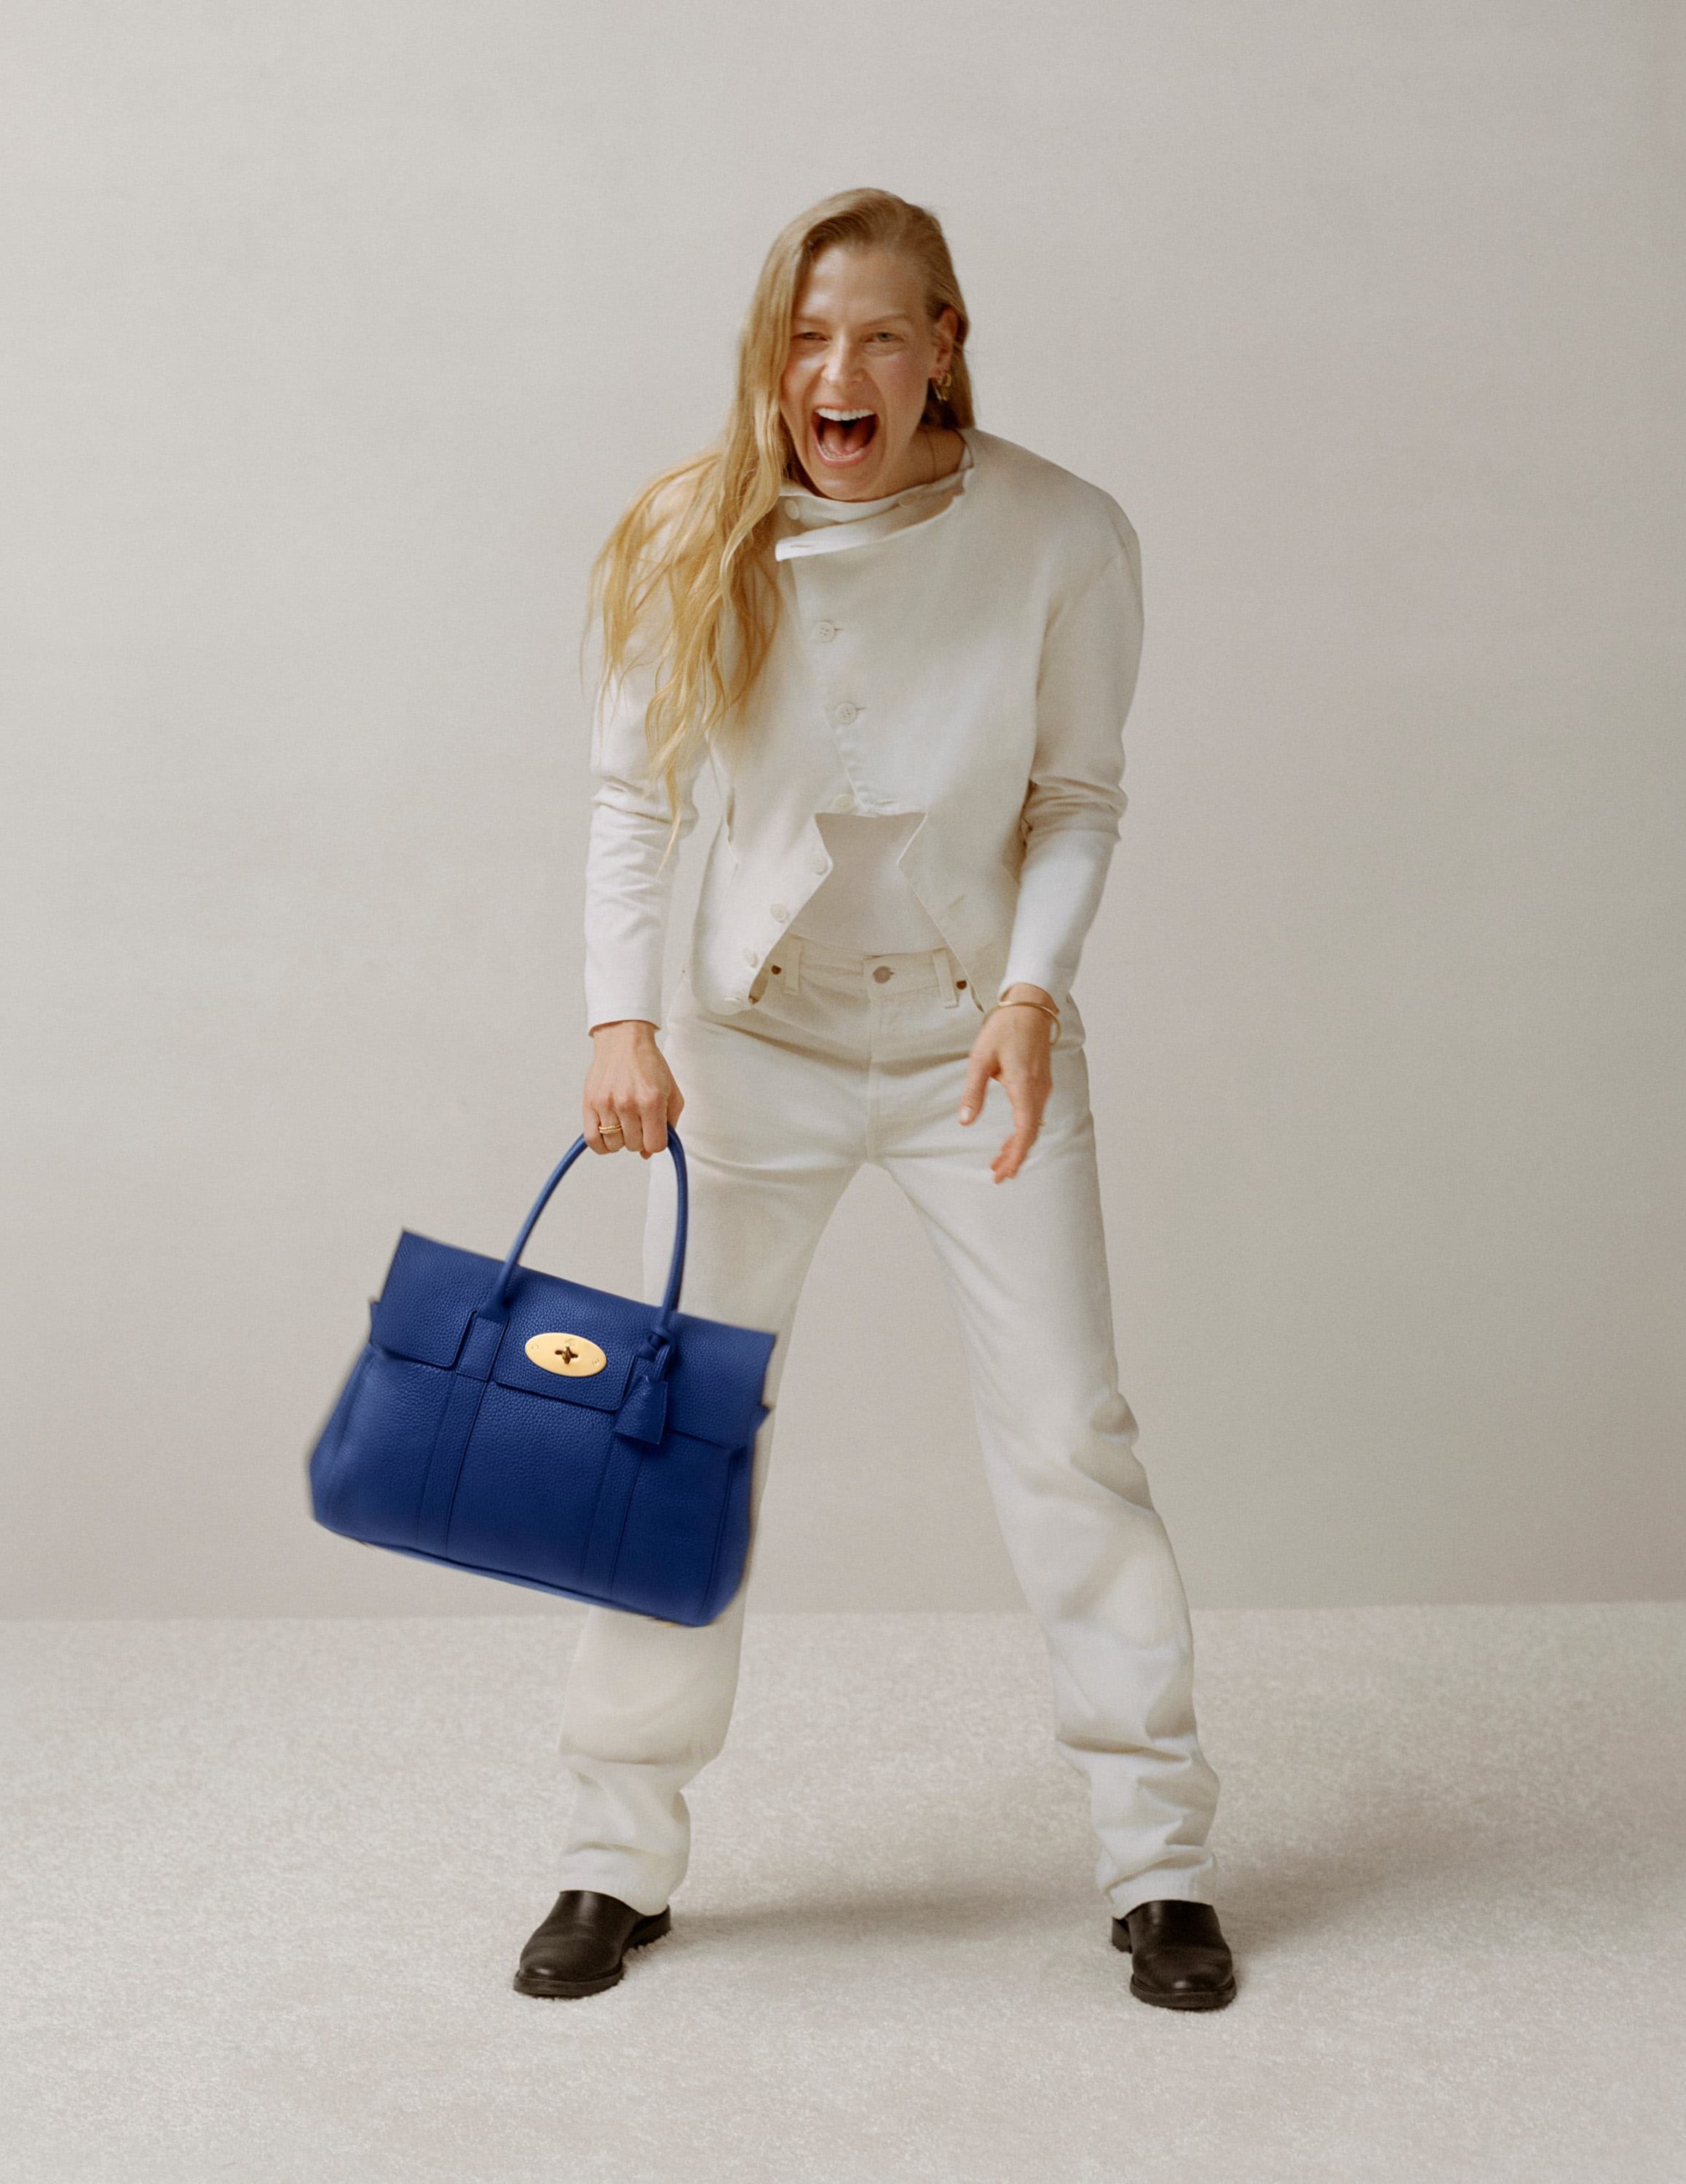 The Mulberry Softie Bag Shines in New Campaign Images - PurseBlog